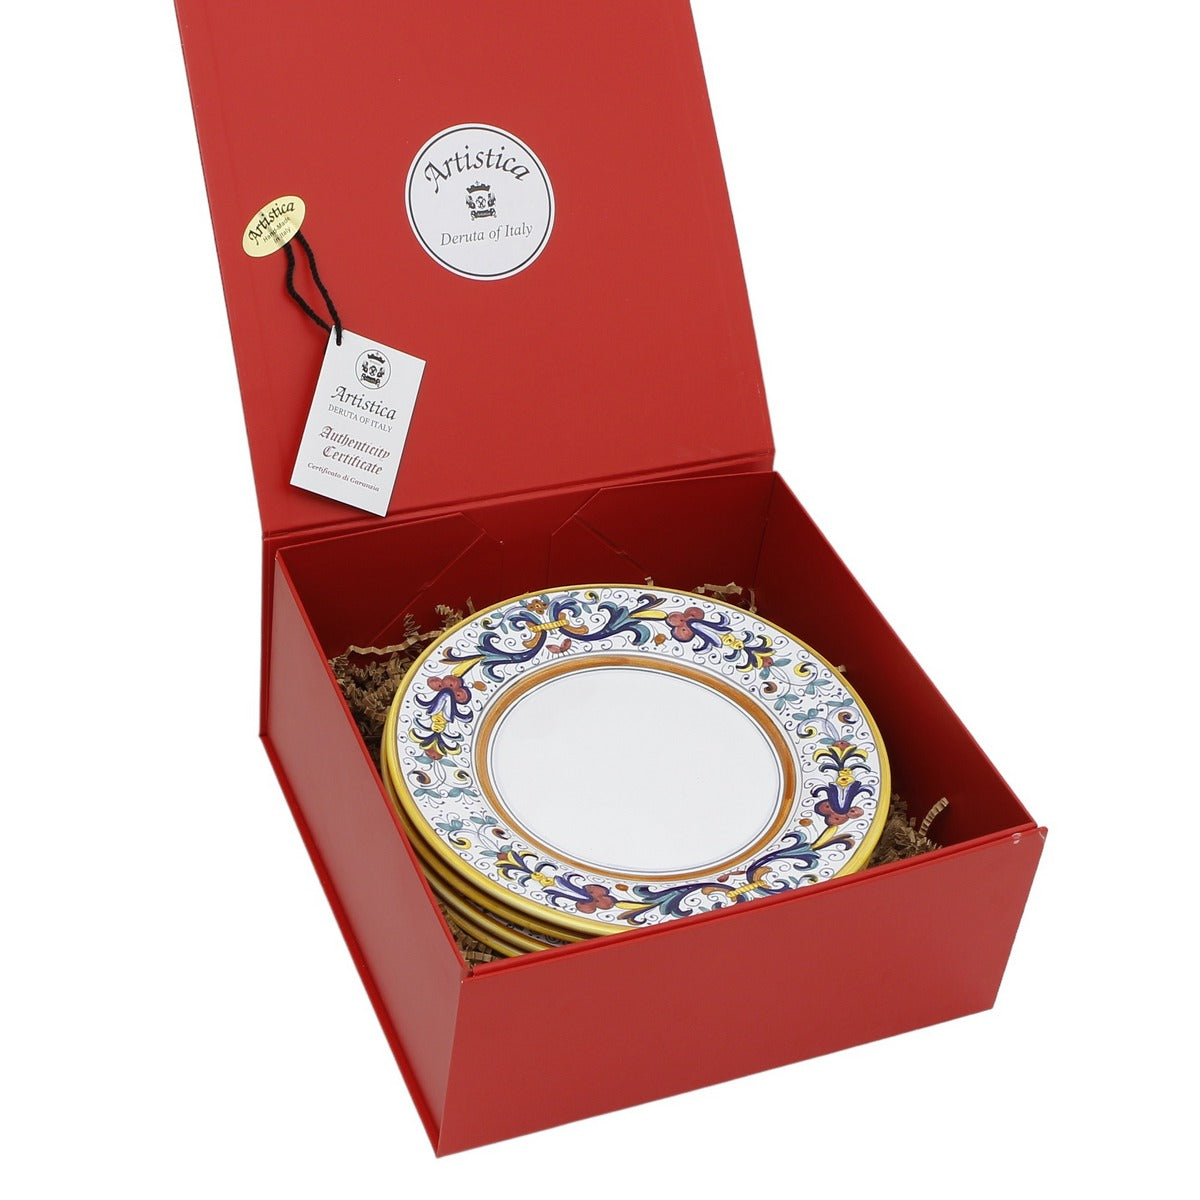 GIFT BOX: DeLuxe Glossy Red Gift Box with Ricco Deruta White Center Salad Plates (Set of 4 pcs)